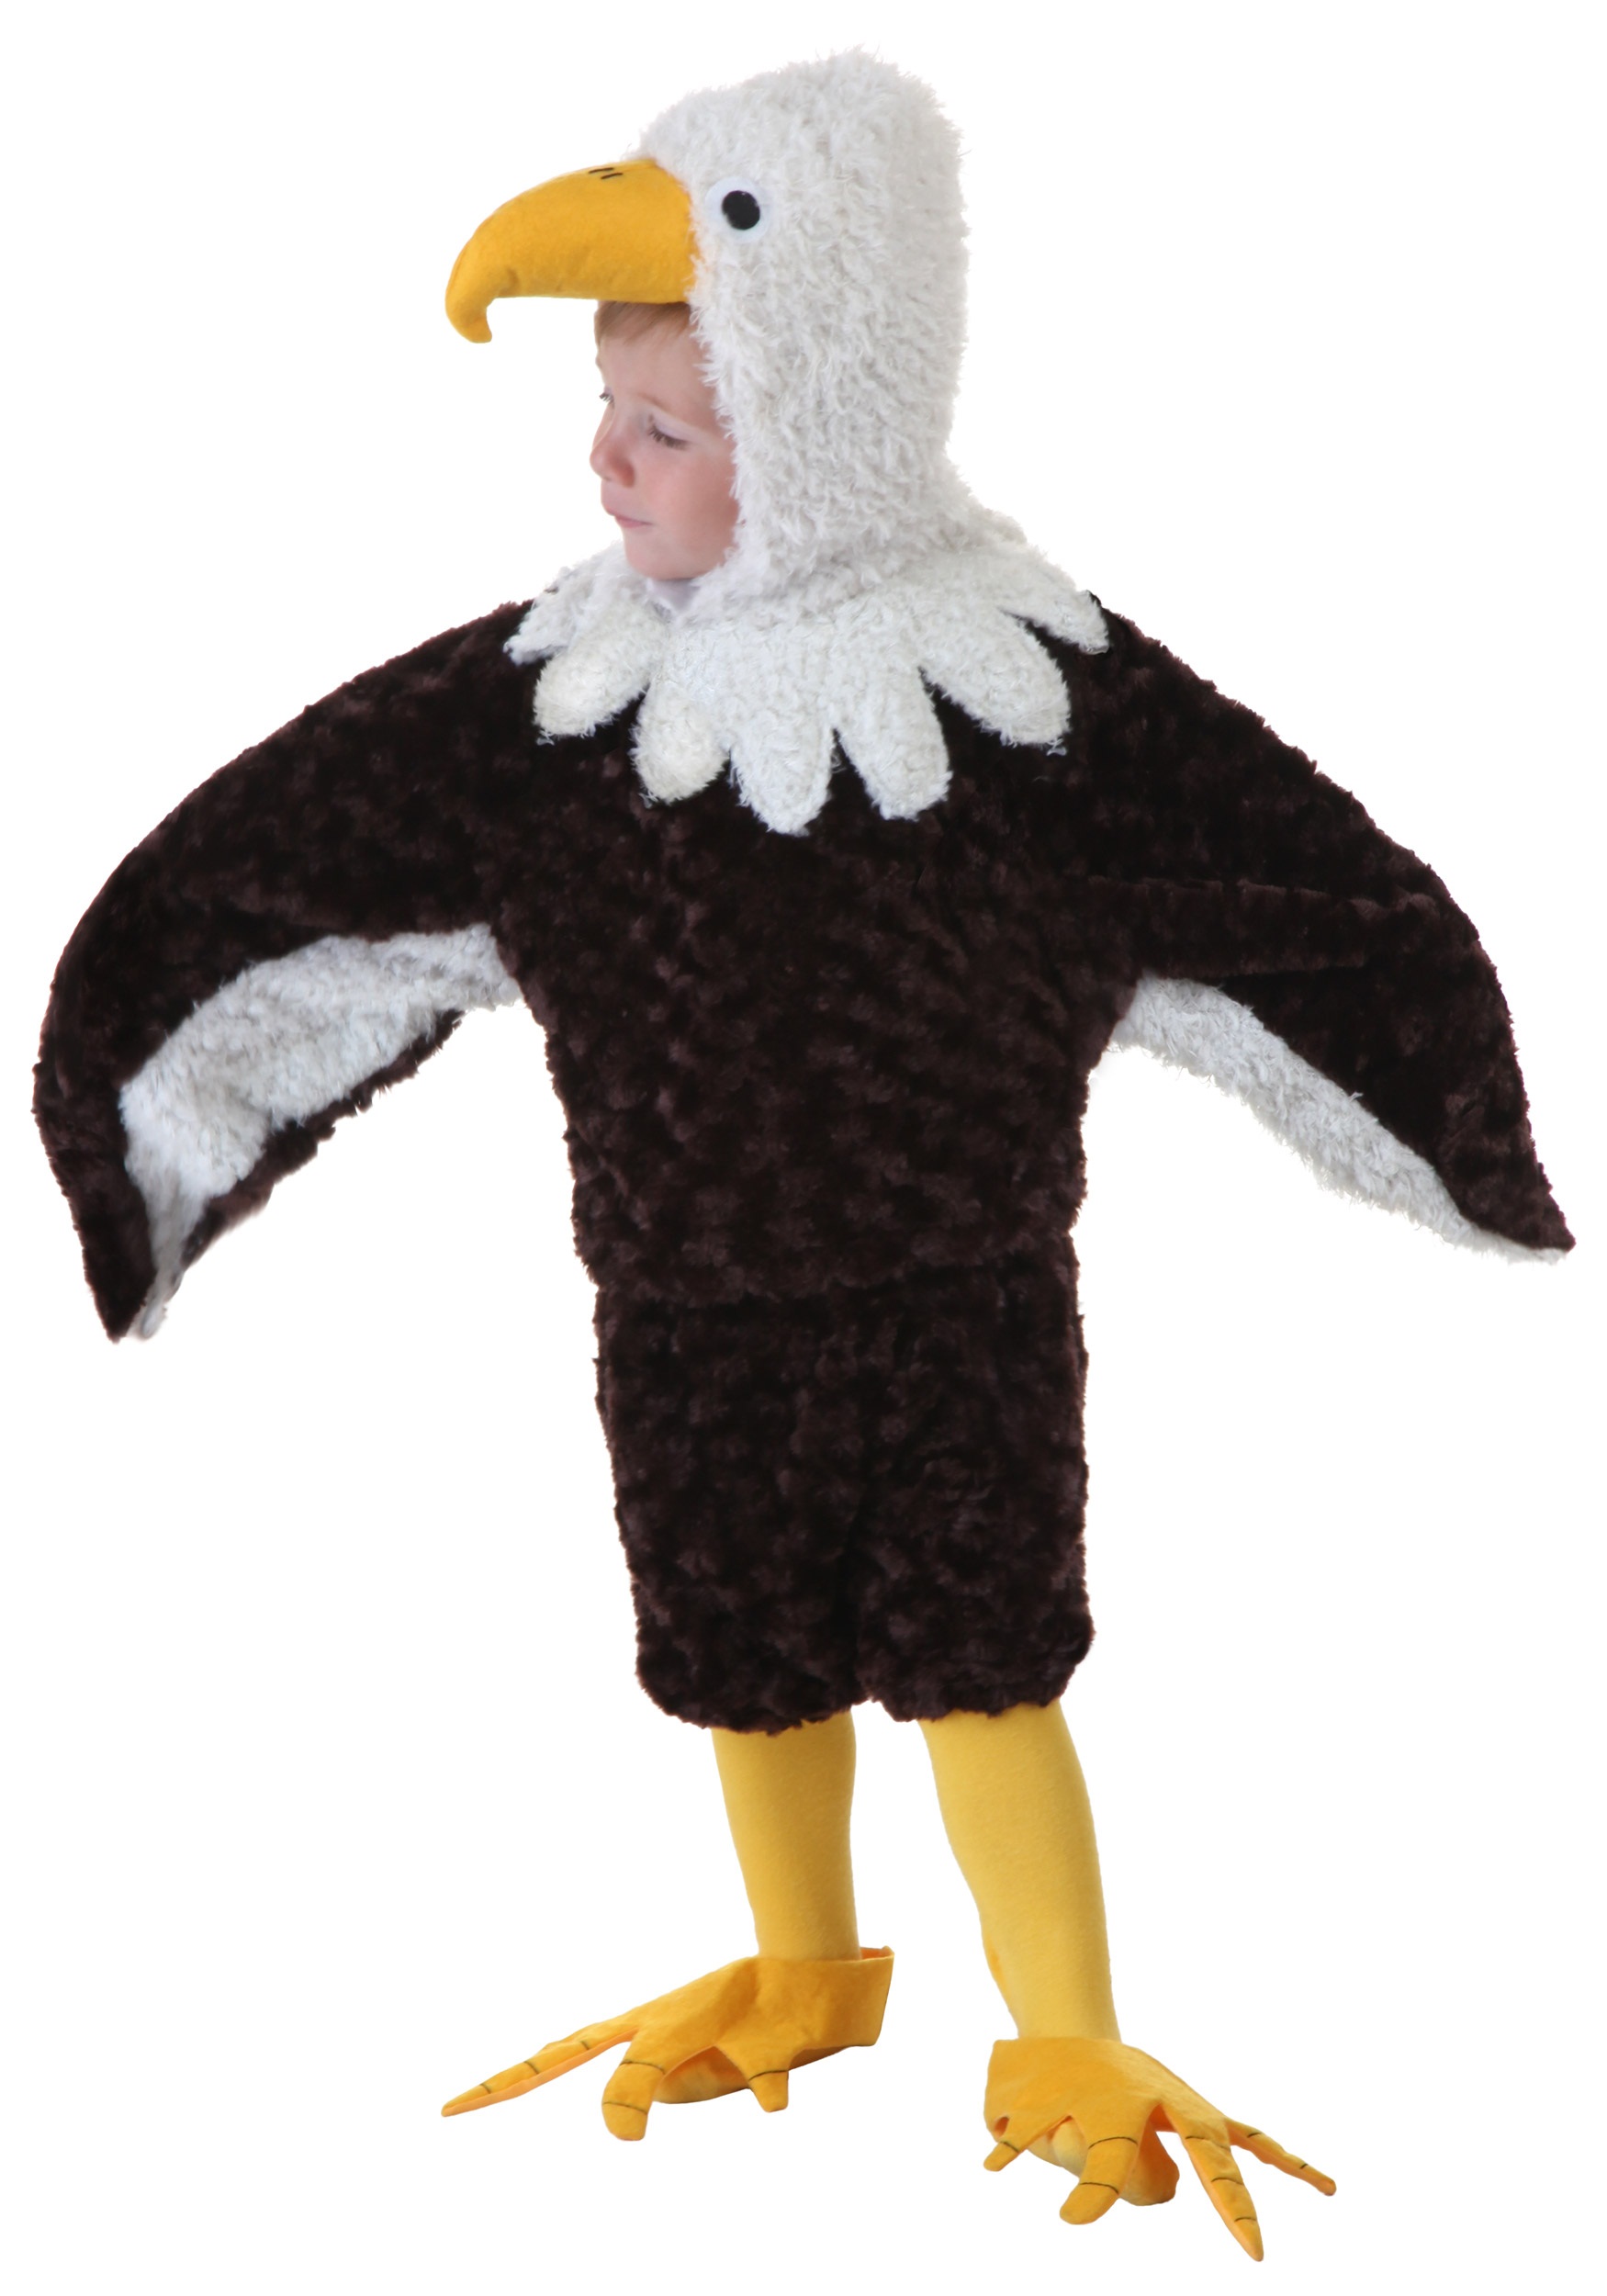 Baby Eagle Mascot Bird Costume - Maskus T0142 Bald Eagle Baby Chick One Size Fits Most / Standard Feet / Choose Custom Colors